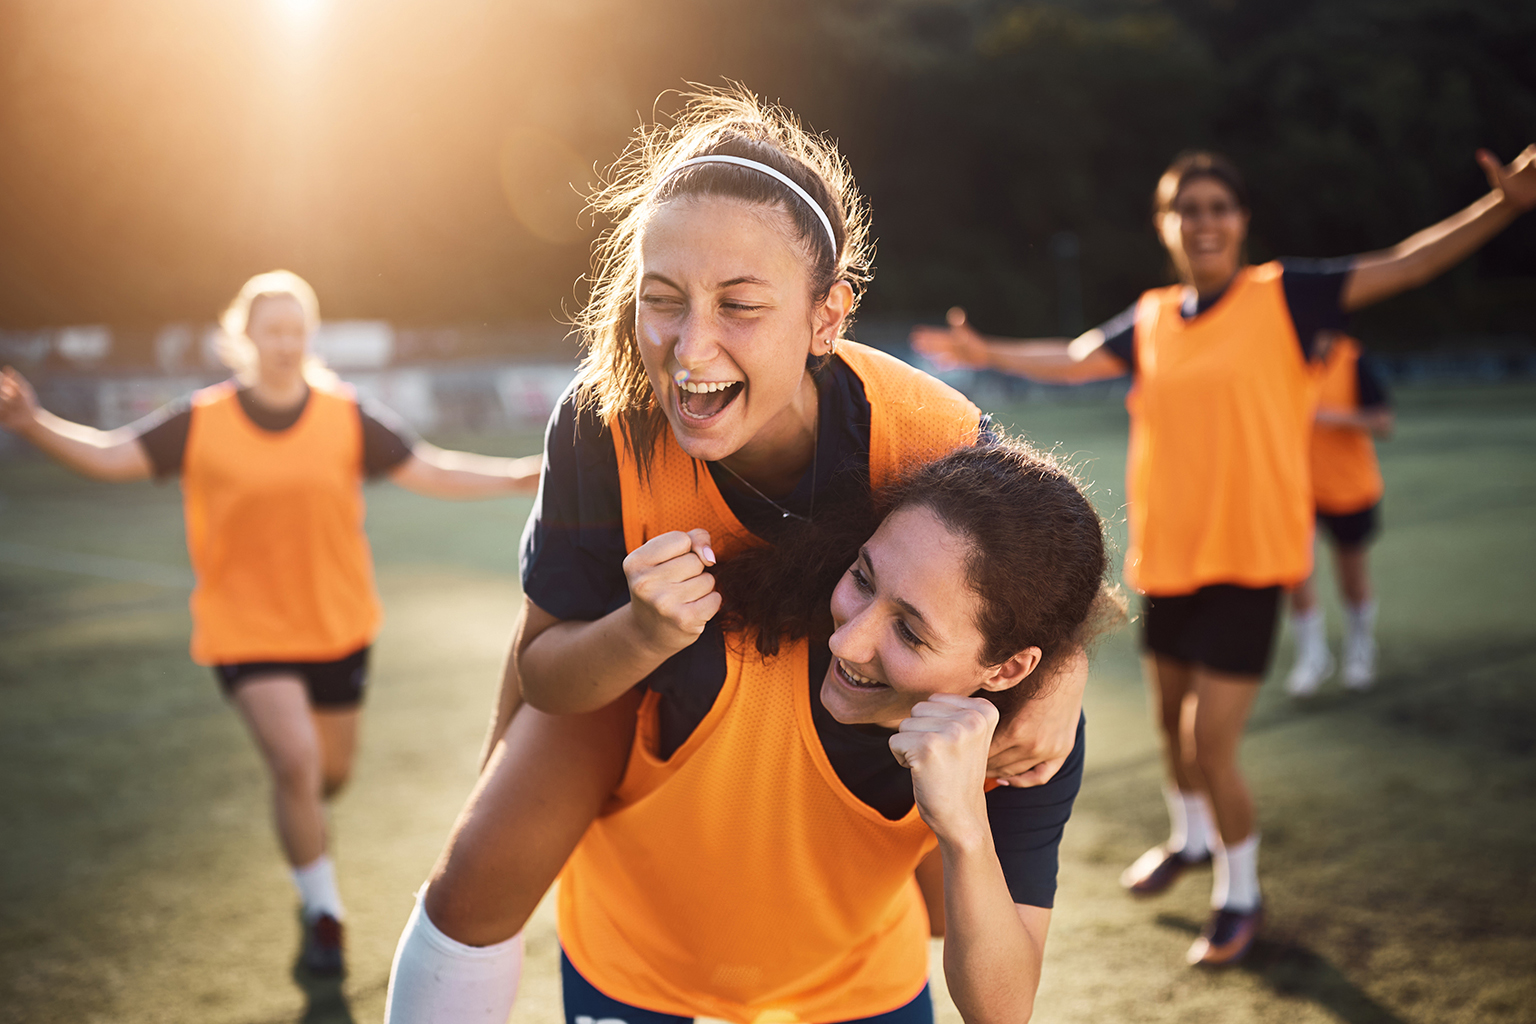 Image of girls celebrating on a sporting field